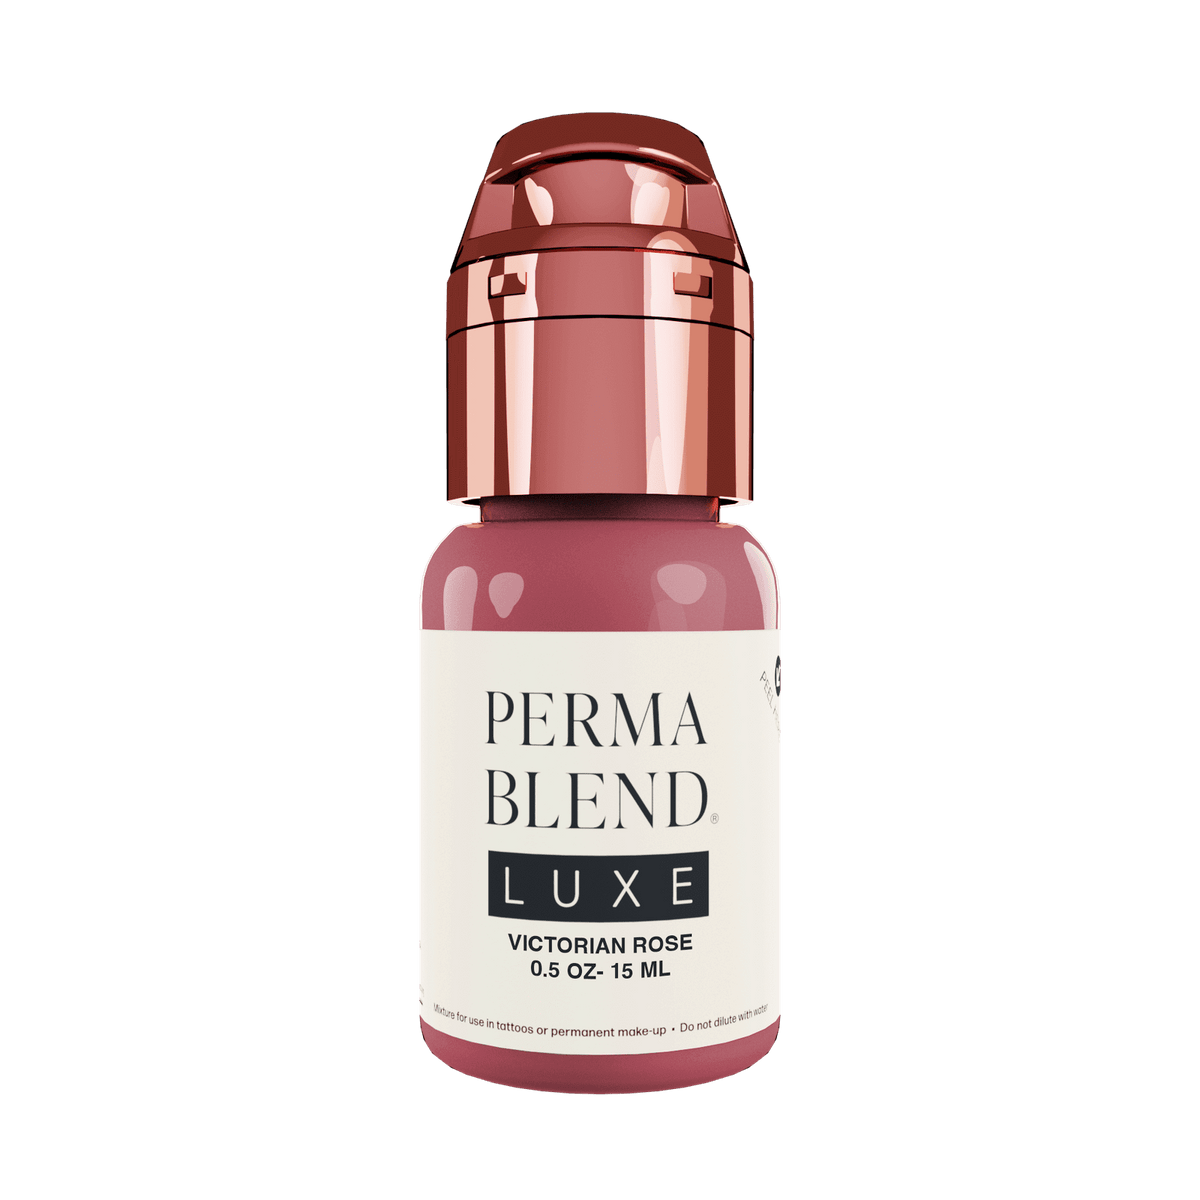 Perma Blend Luxe Victorian Rose